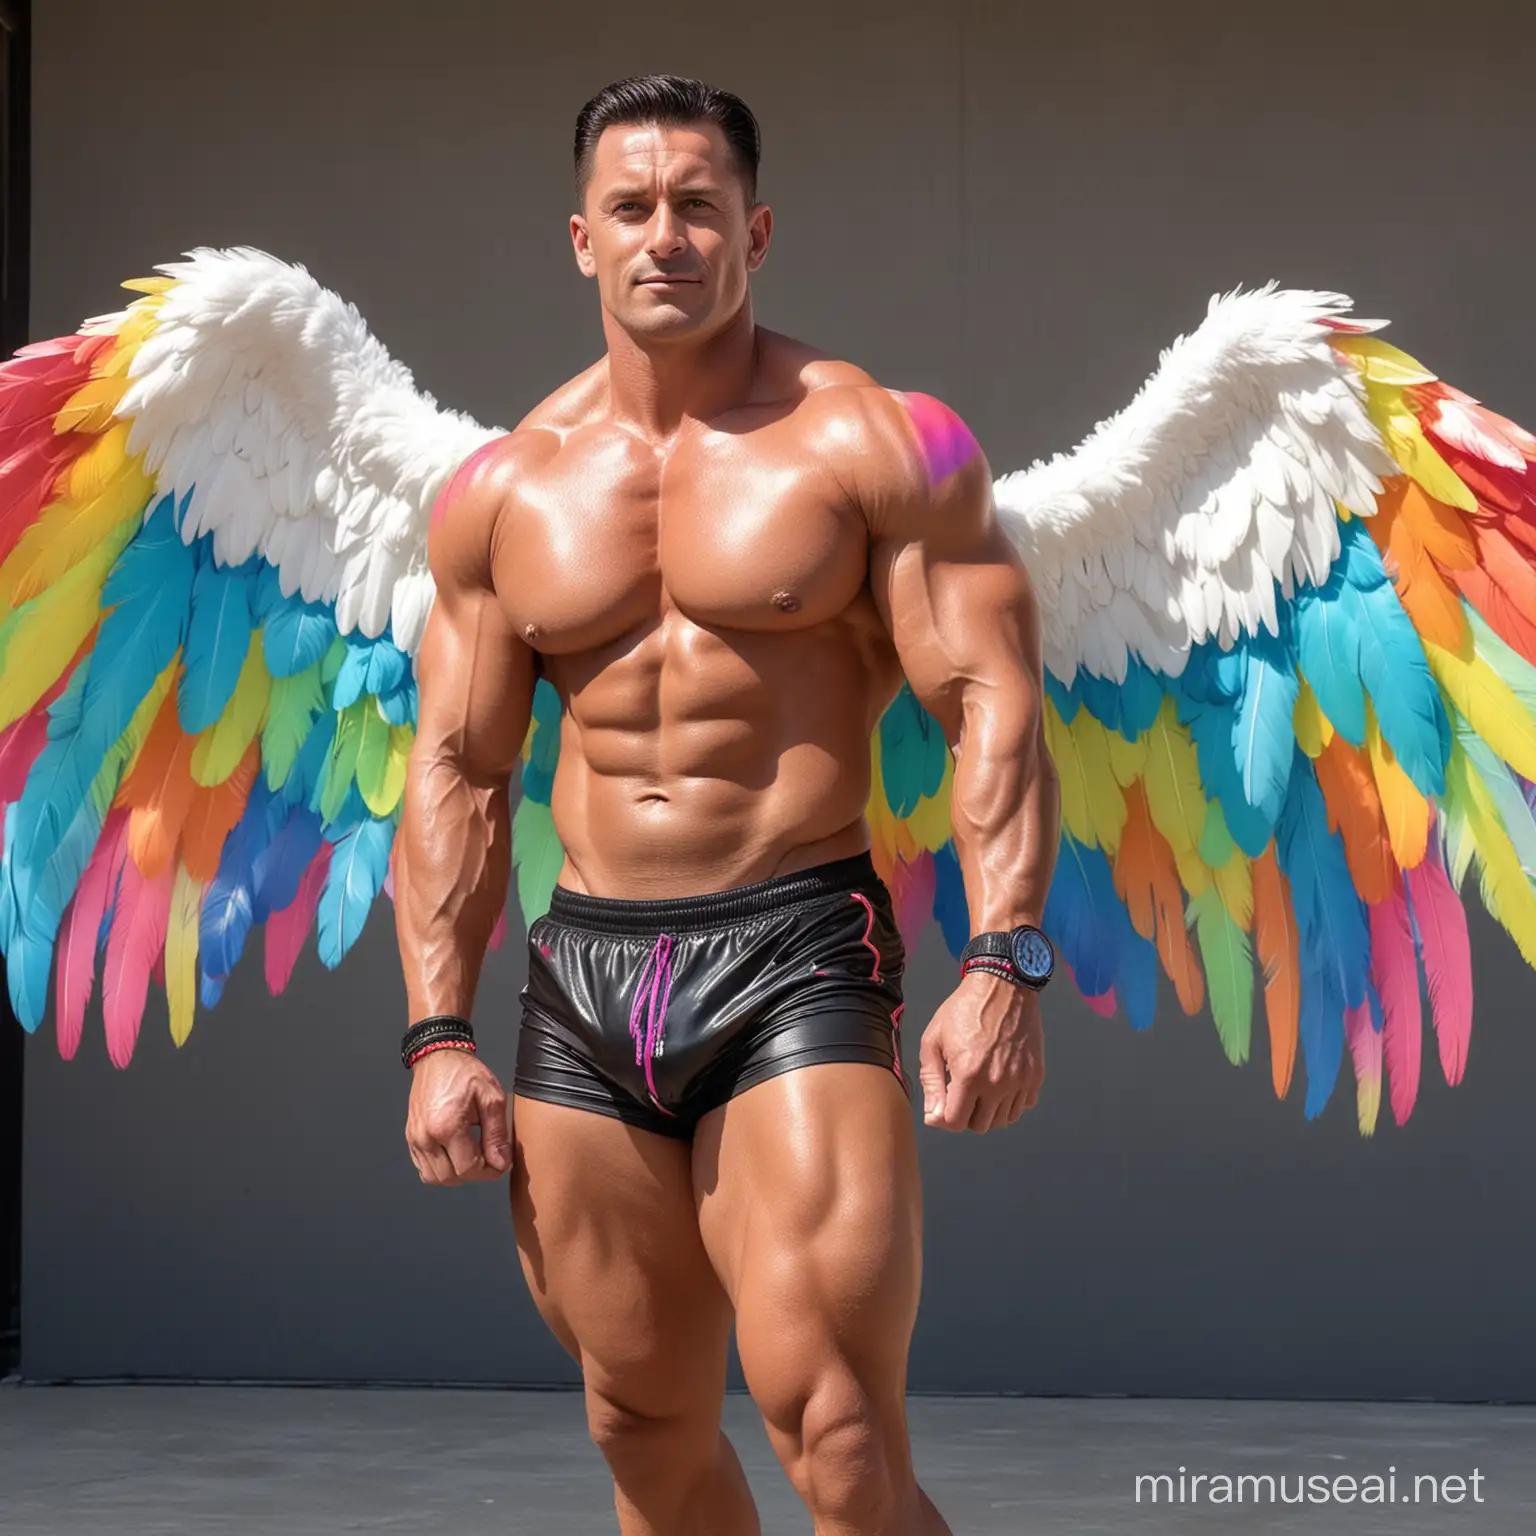 Muscular 40s Bodybuilder Flexing in Colorful Rainbow Wings Jacket with Doraemon